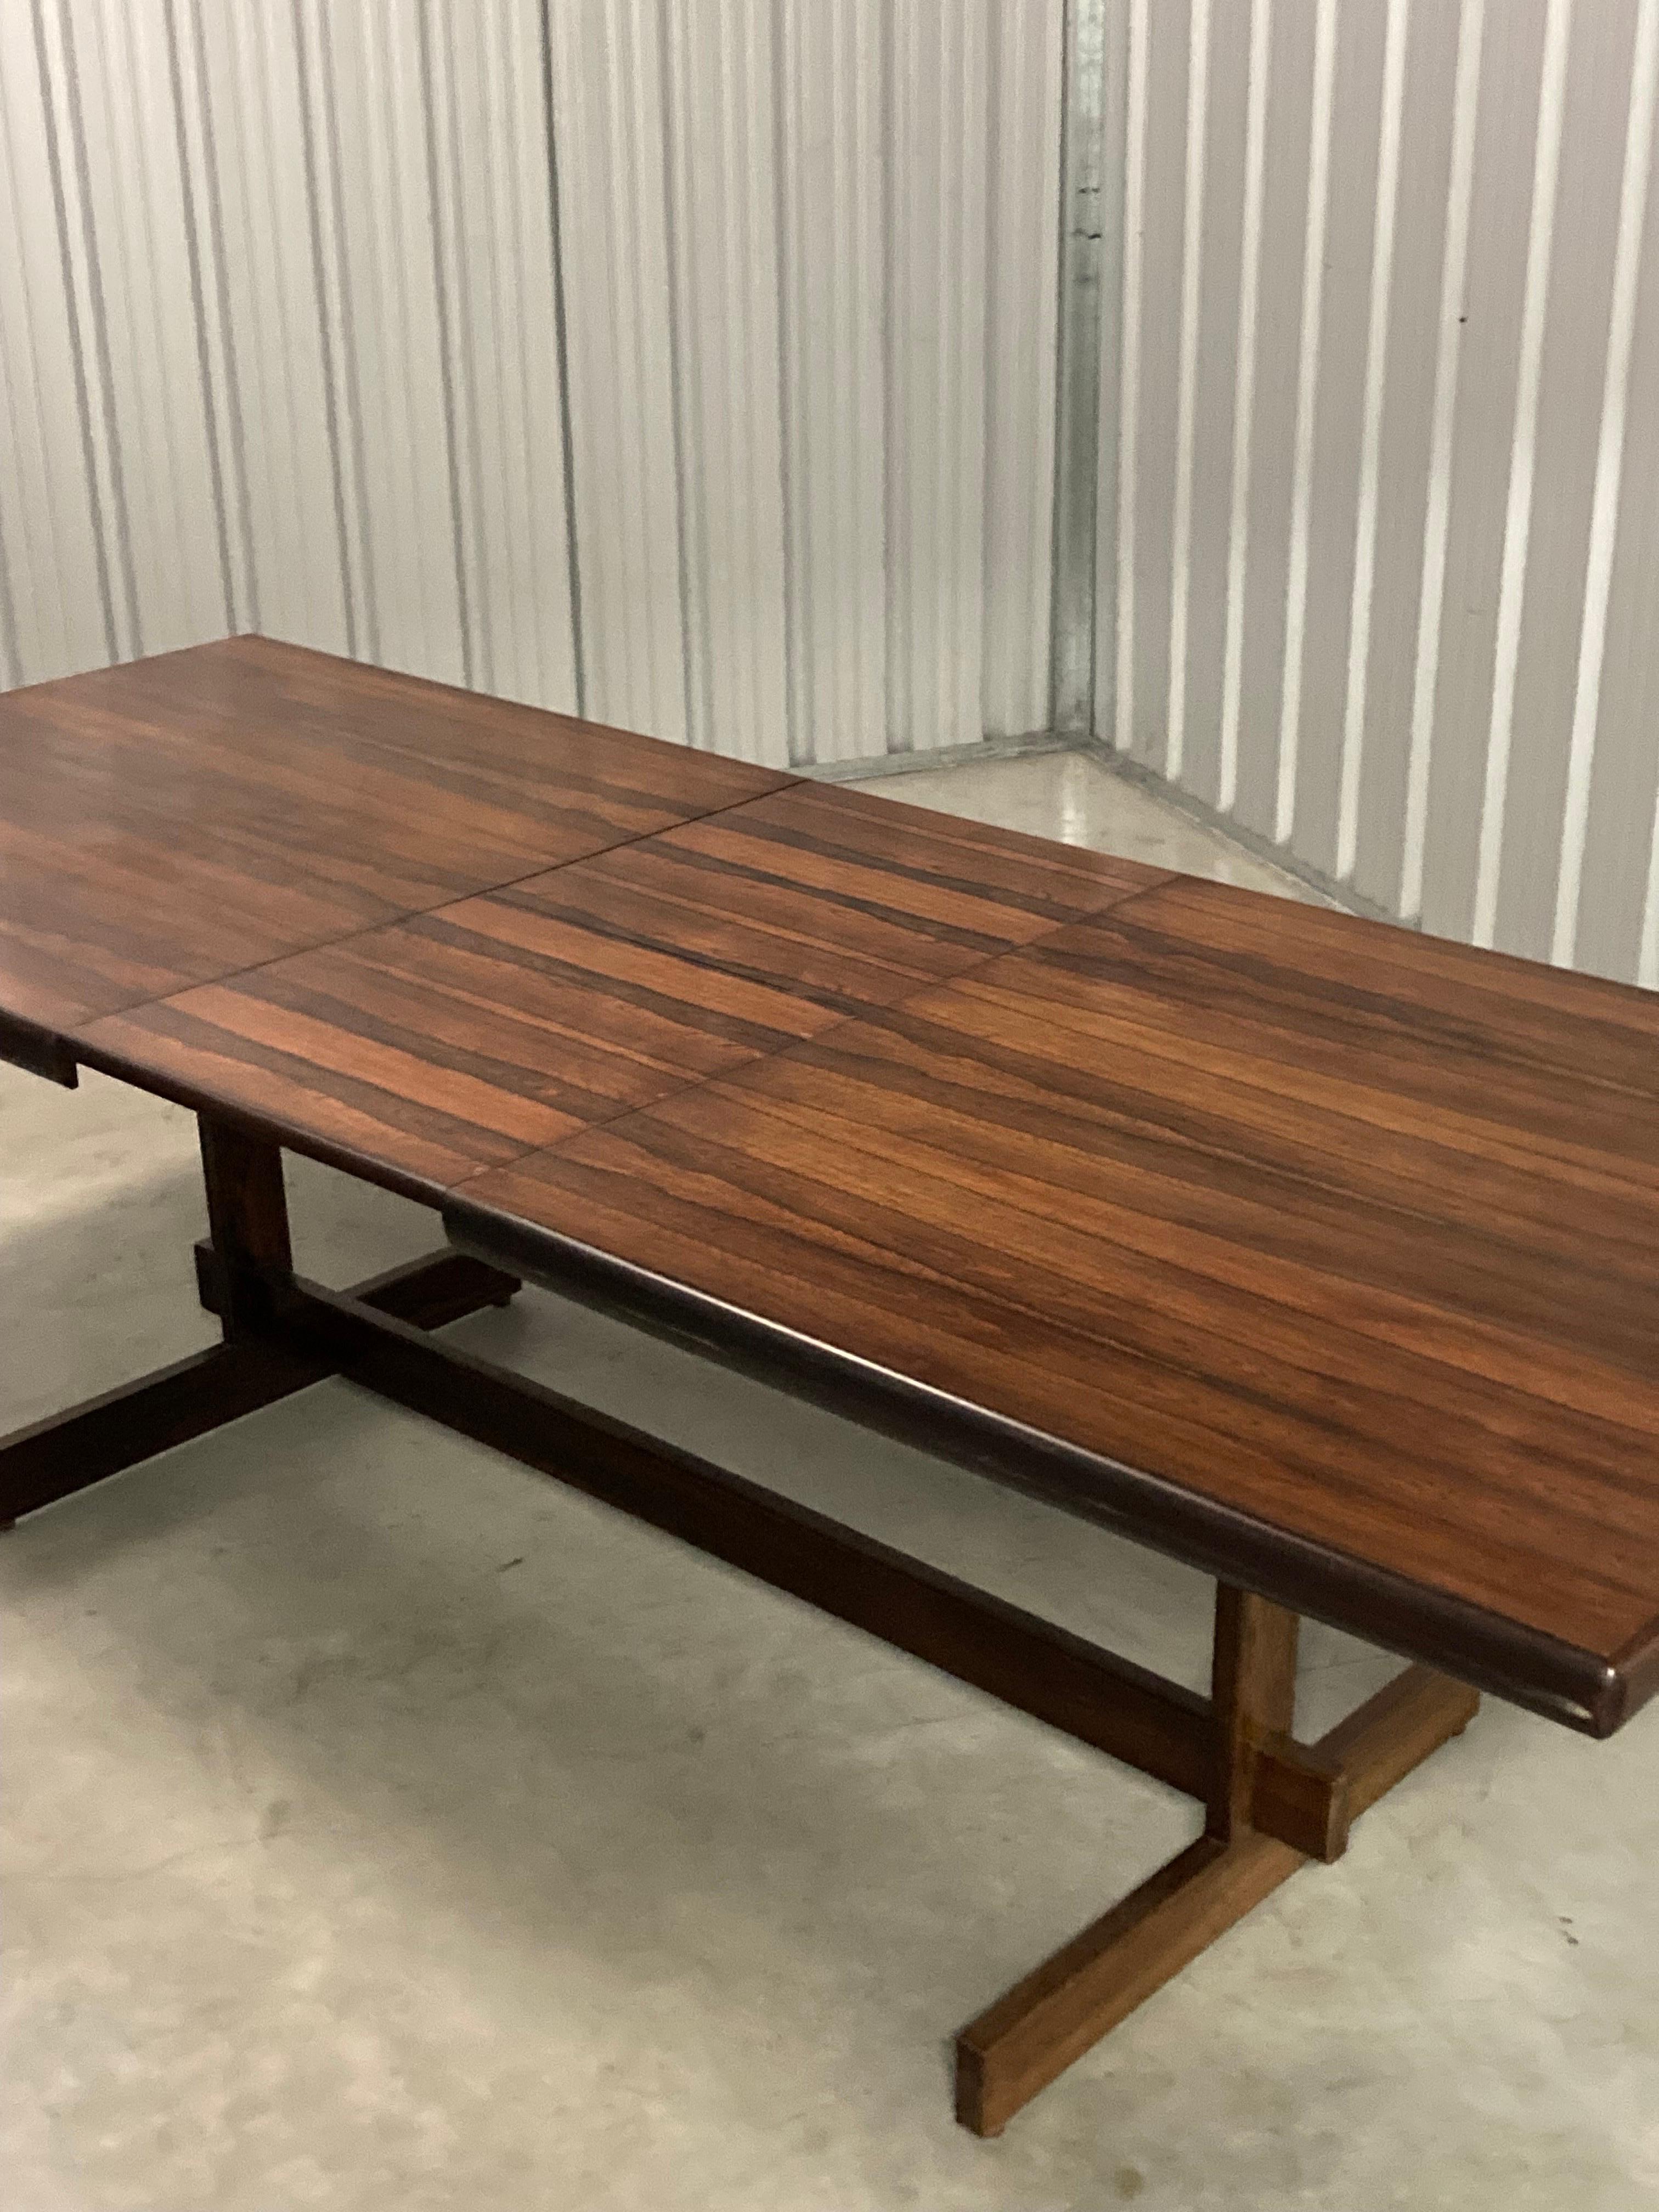 1950s Brazilian Design Extending Dining Table by Celina Decorações In Good Condition For Sale In London, GB